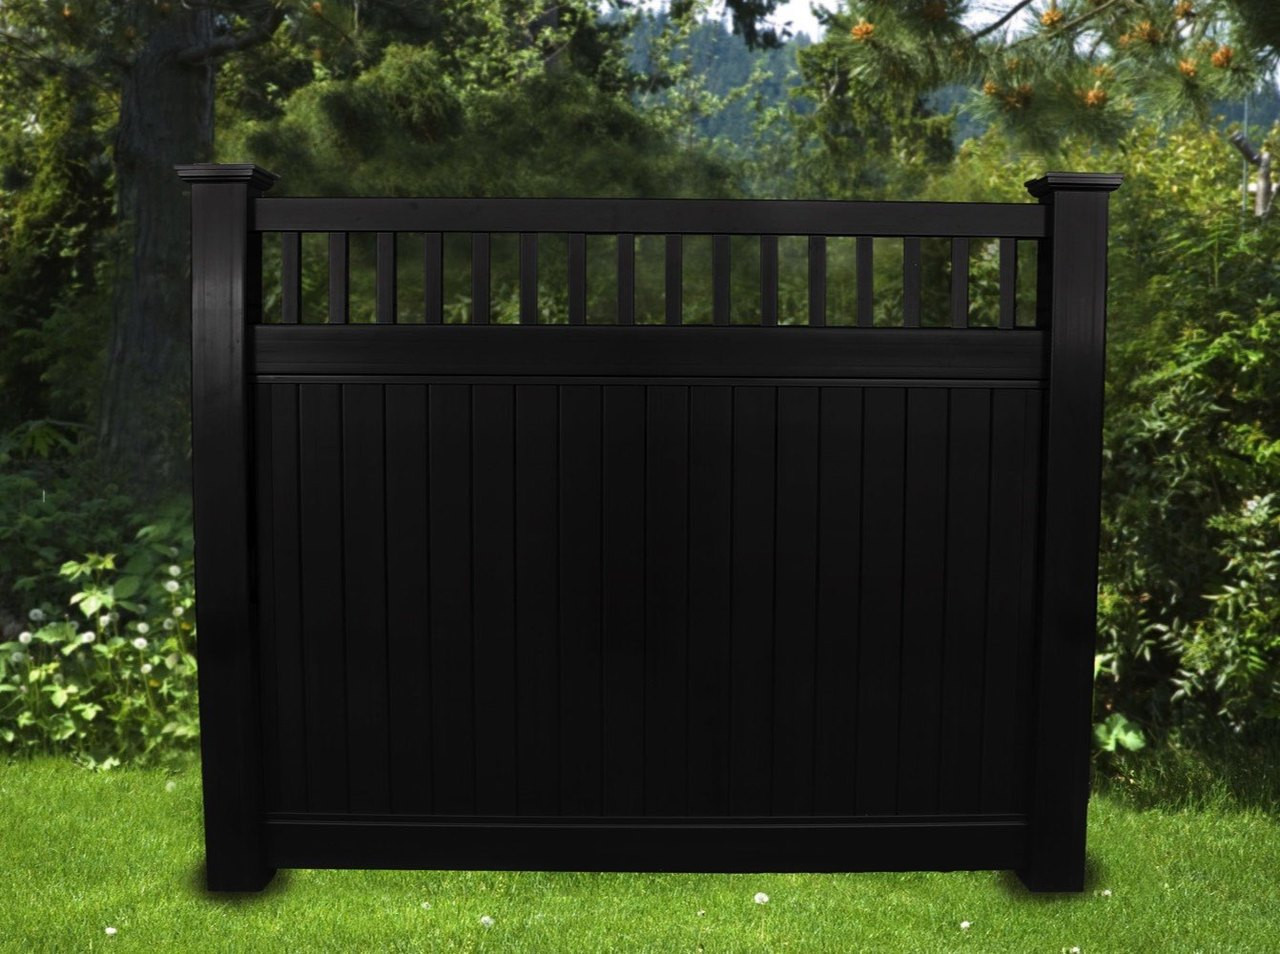 BLACK VINYL PRIVACY PICKET TOP FENCE 6 FT X 6 FT